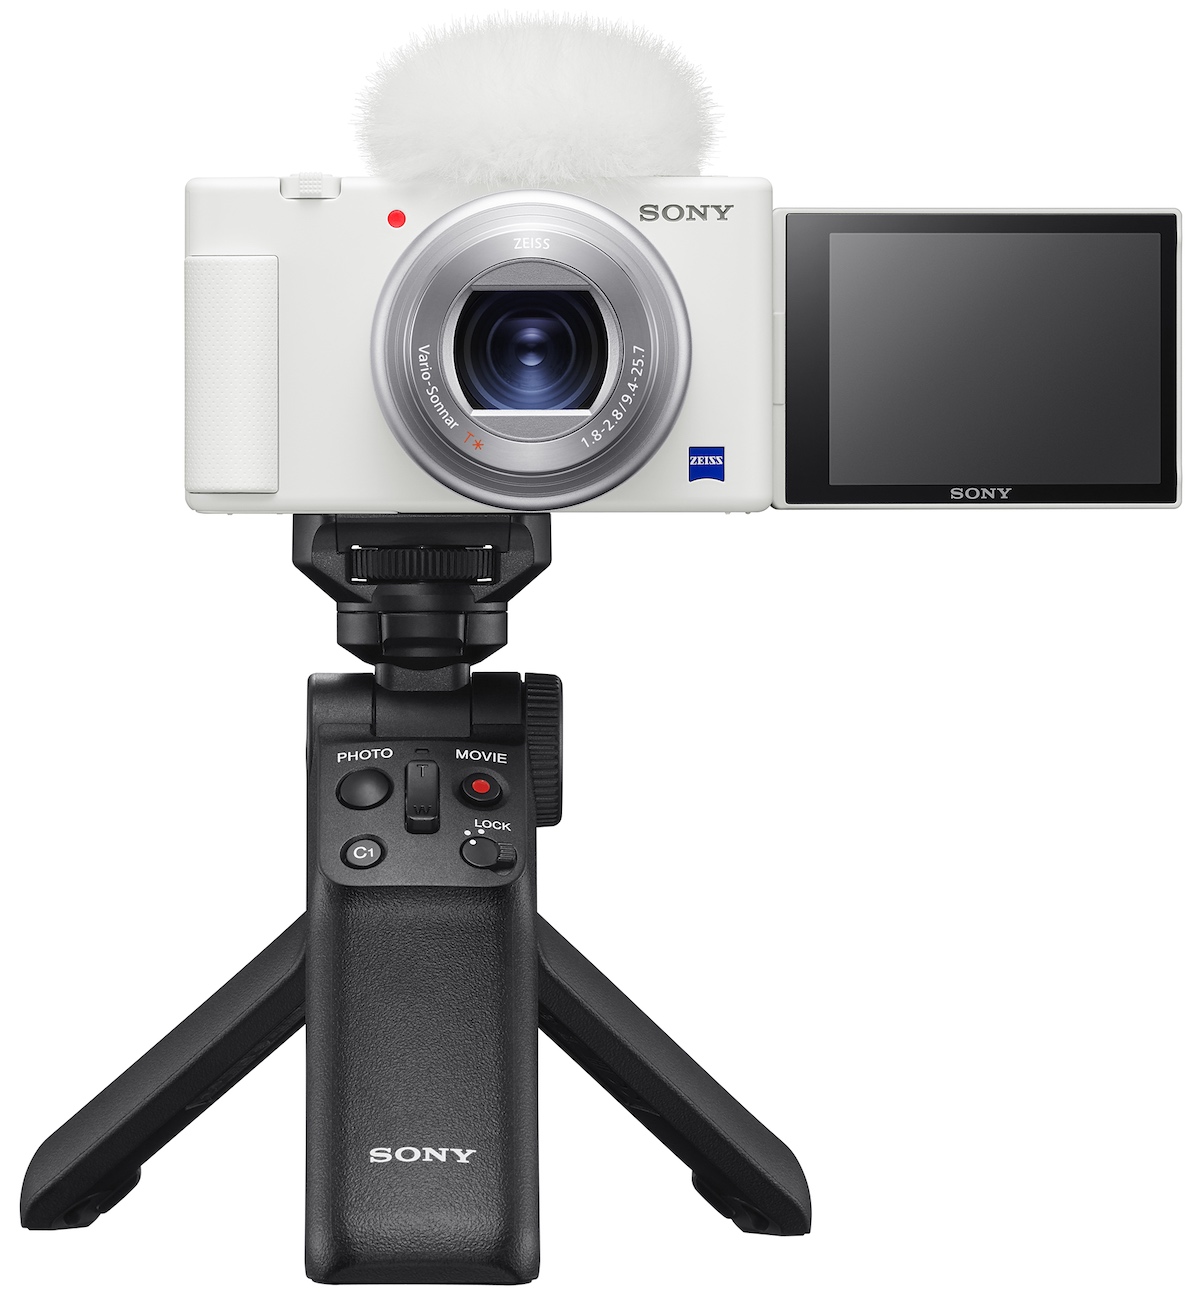 The Sony ZV-1 camera is now available in white - Photo Rumors